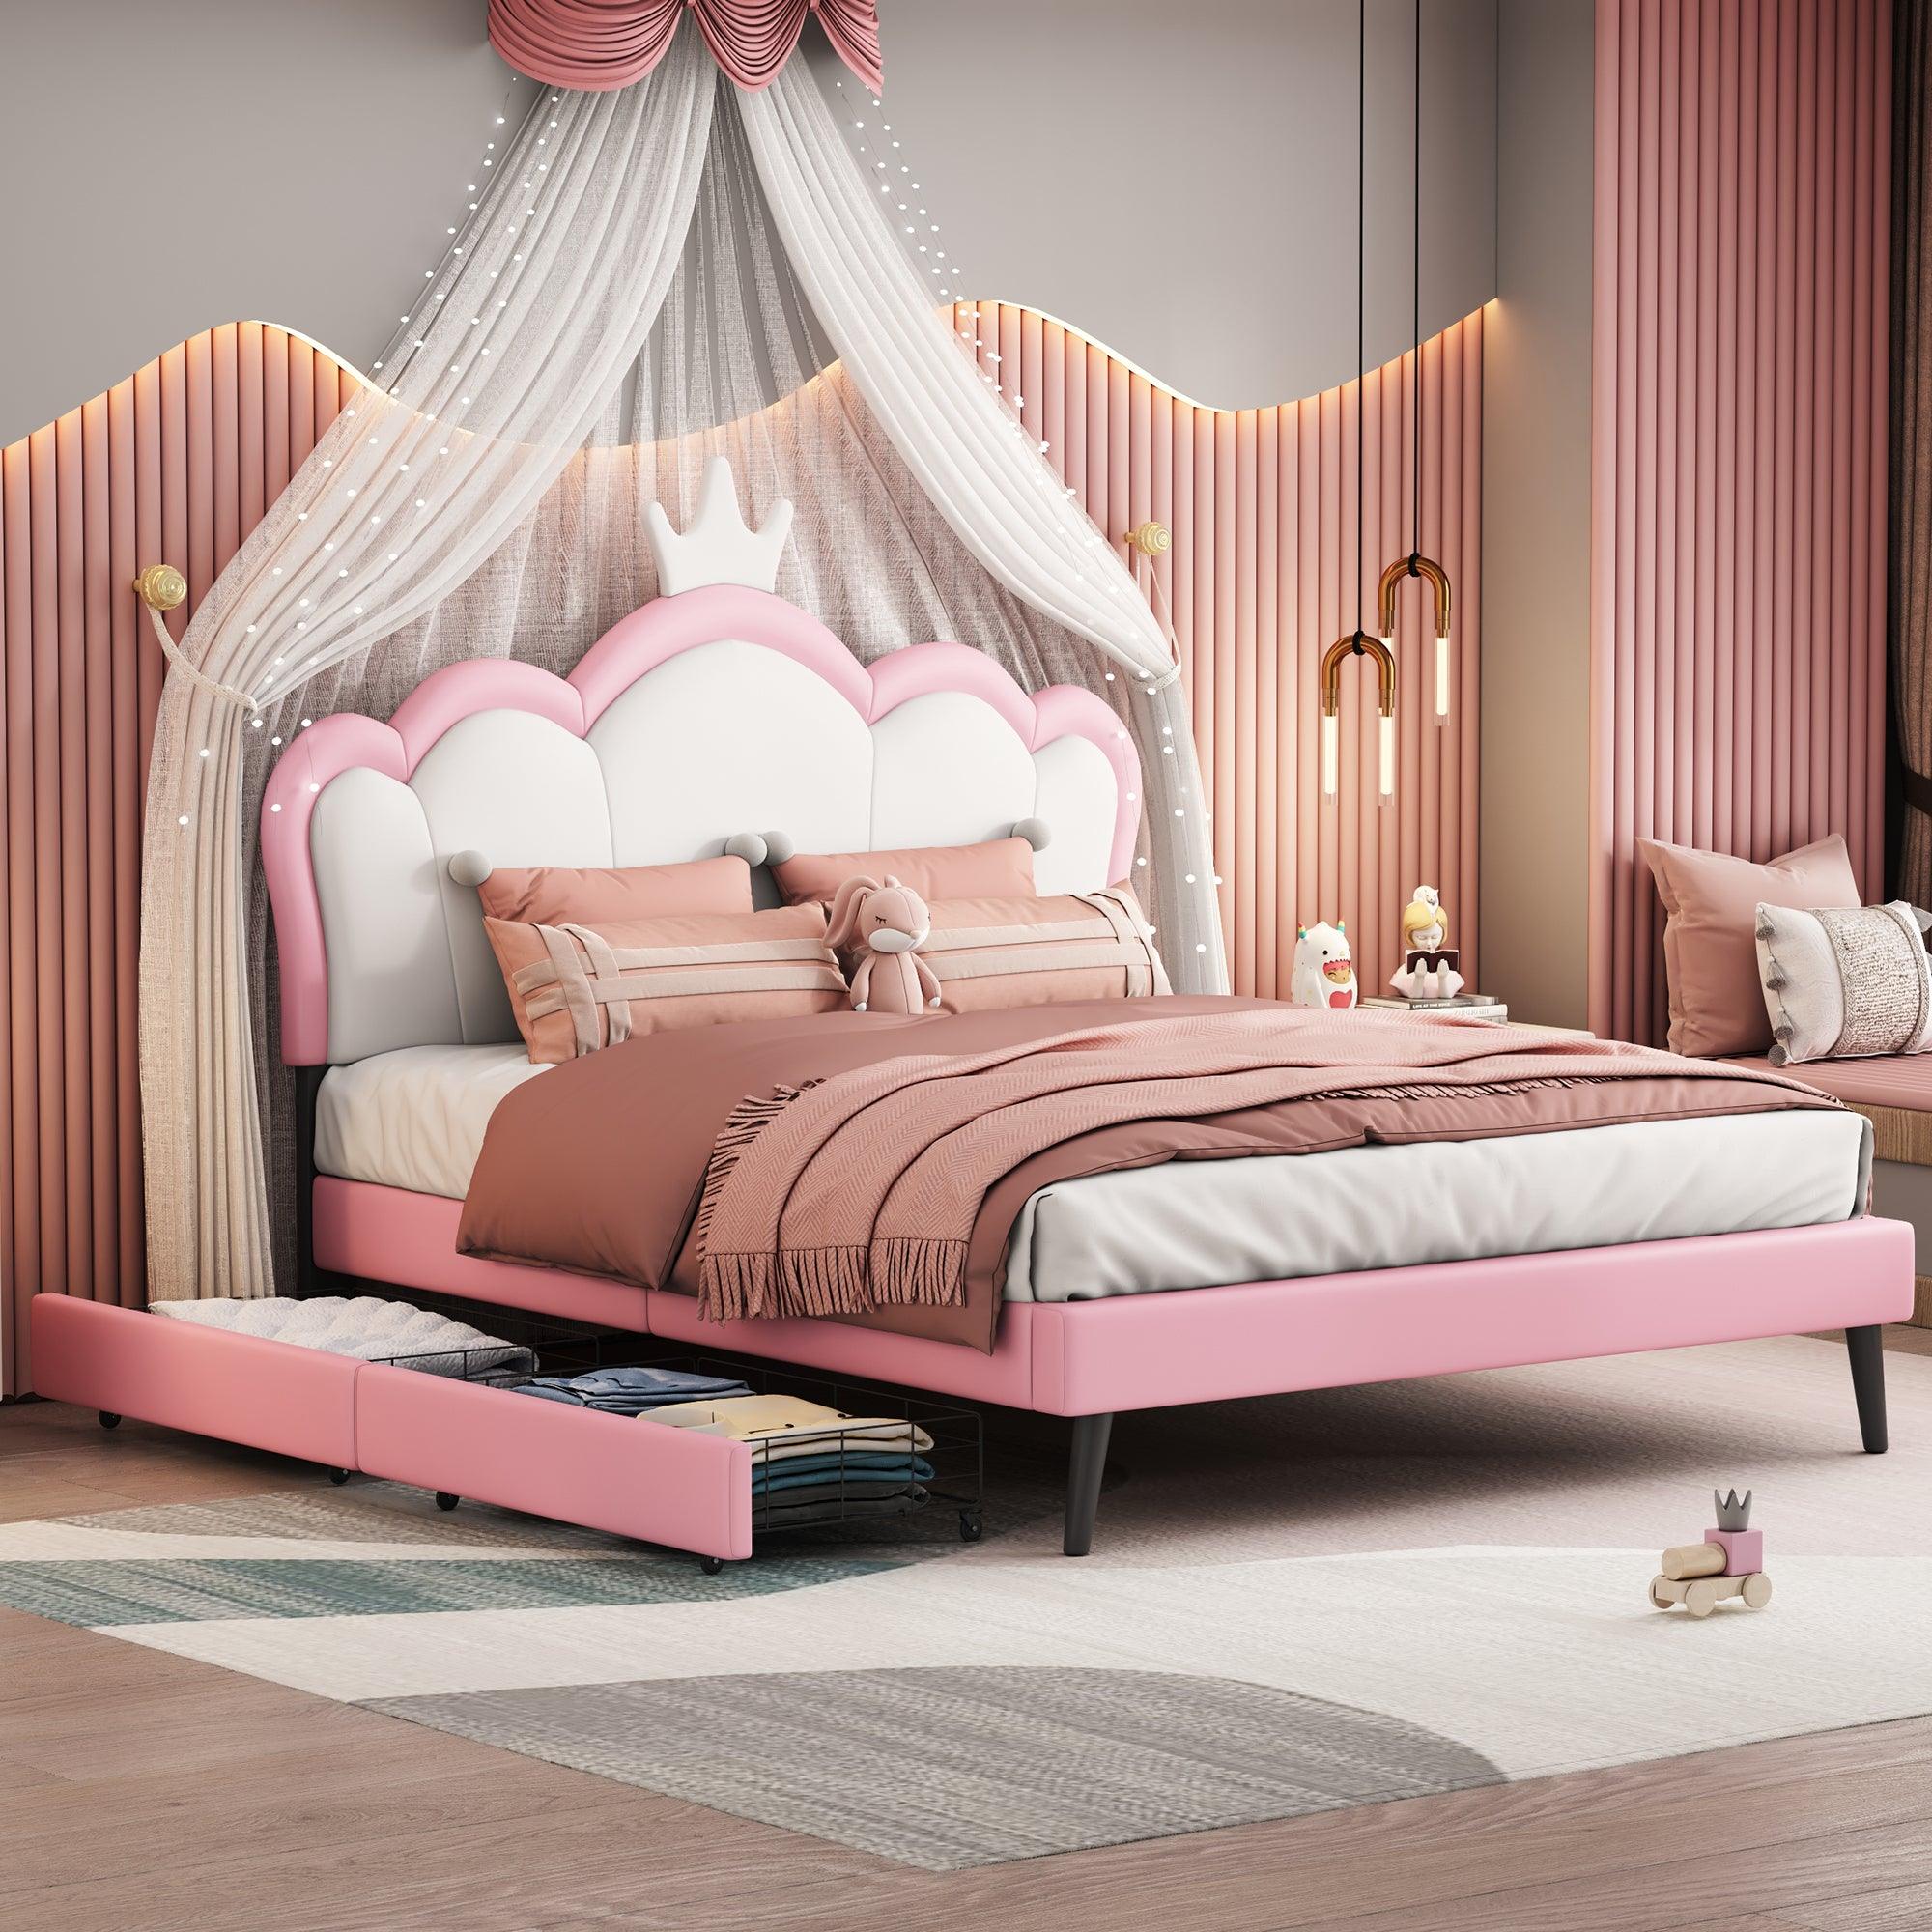 🆓🚛 Full Size Princess Bed With Crown Headboard & 2 Drawers, Full Size Platform Bed With Headboard & Footboard, White & Pink